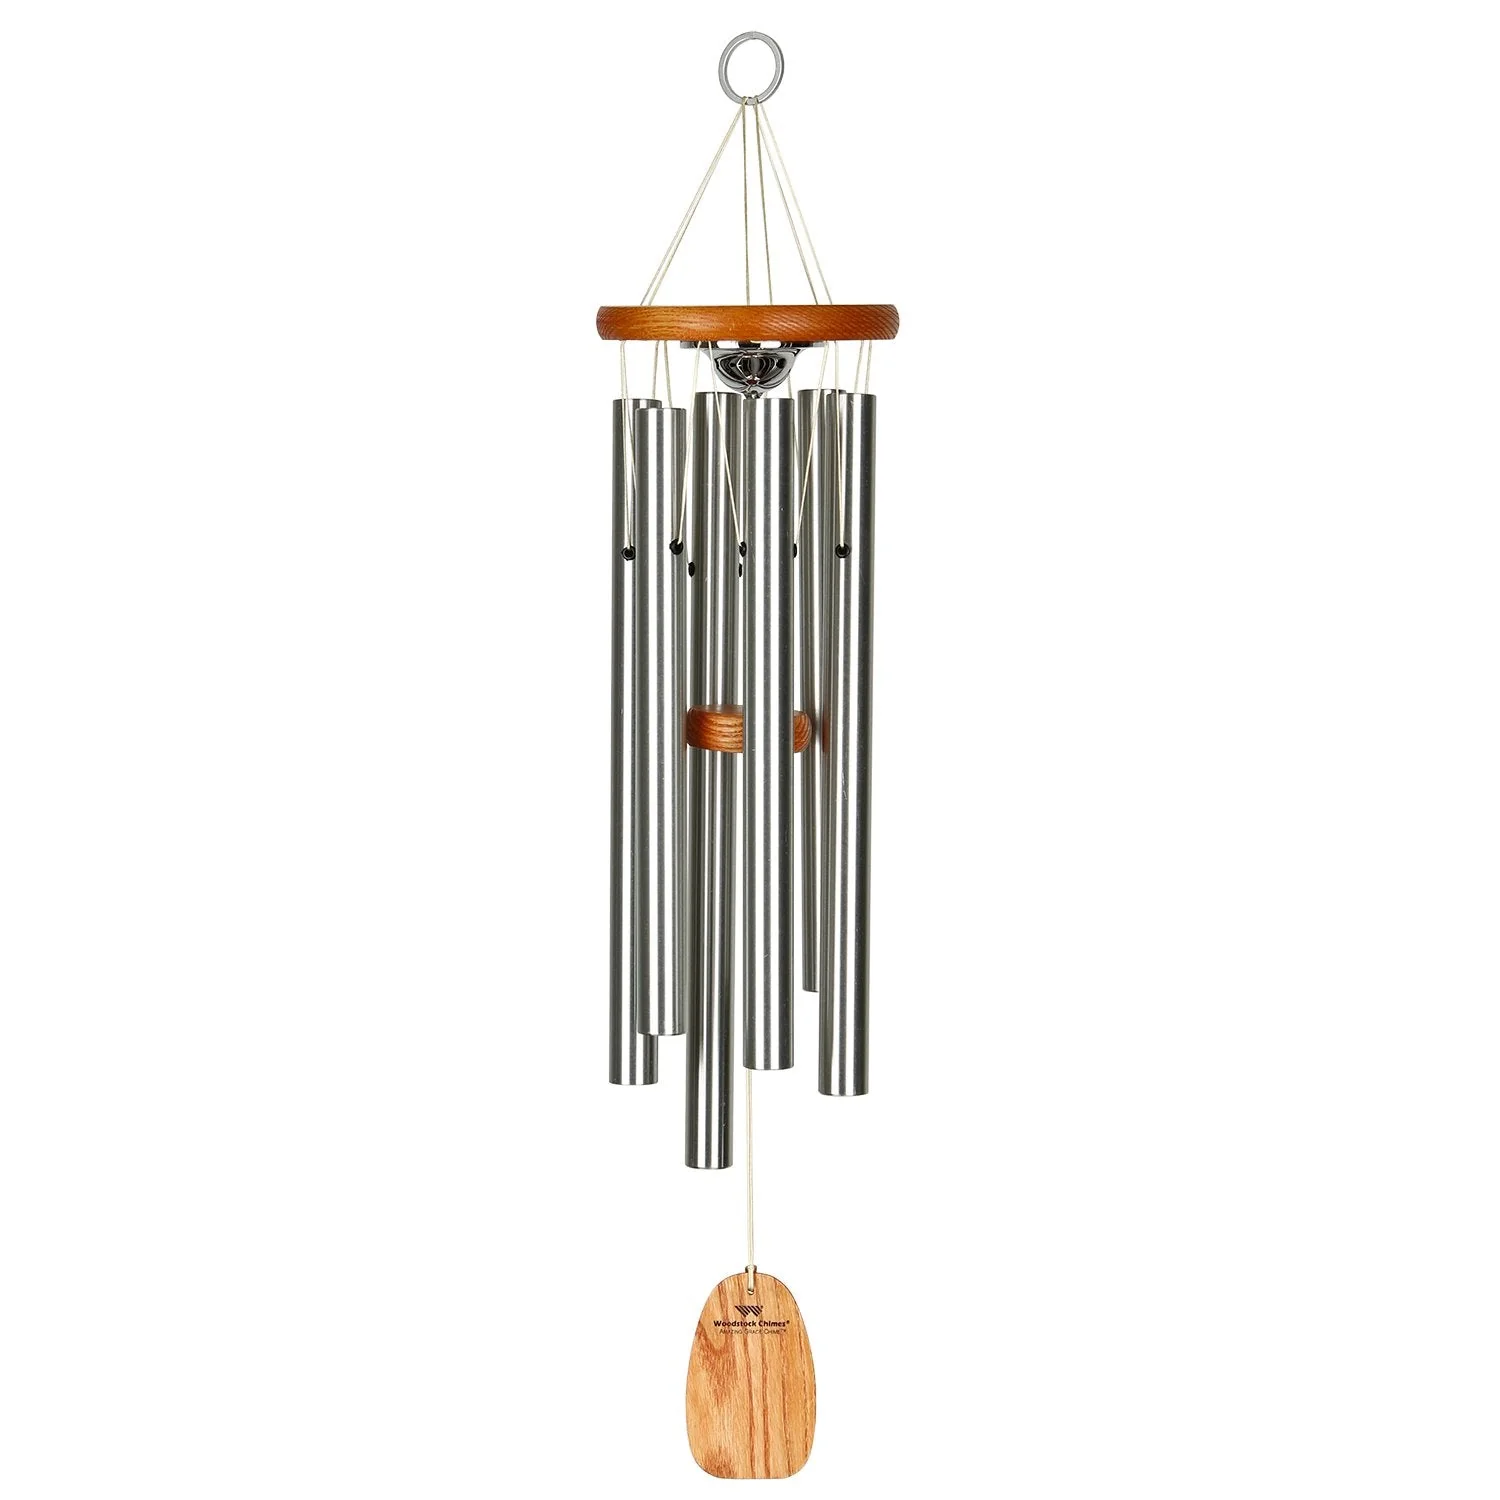 Amazing Grace 24.5 Inch Wind Chime - Engravable Sail and Memorial Urn